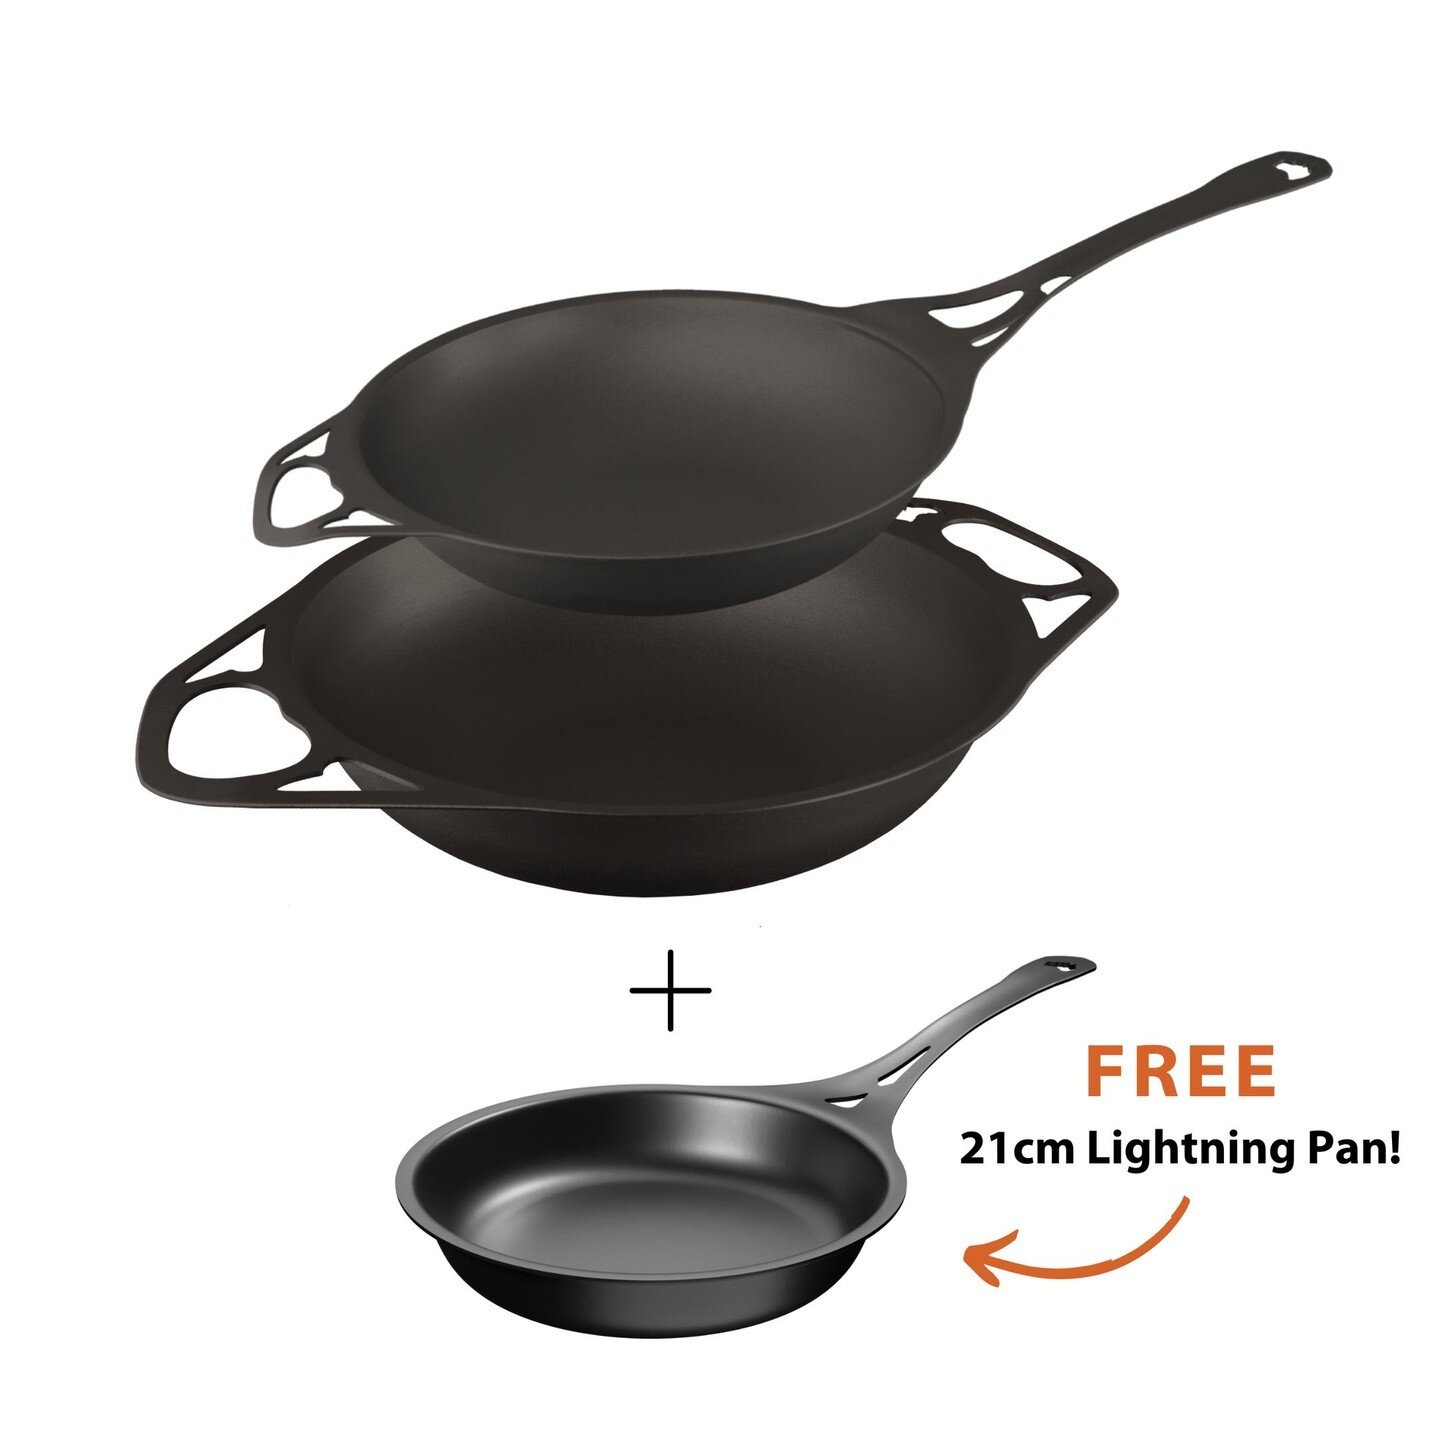 Be Dad's favourite this Father's Day with a WOKin' set of Solid cookware! 🥘With this set, you get two different-sized woks, and you also score Dad a FREE 21cm Lightning Pan! ⁠
⁠
The set includes:⁠
1 x 28cm/3.5L Bomb&eacute;e Wok⁠
1 x 35cm/7L Dual Ha